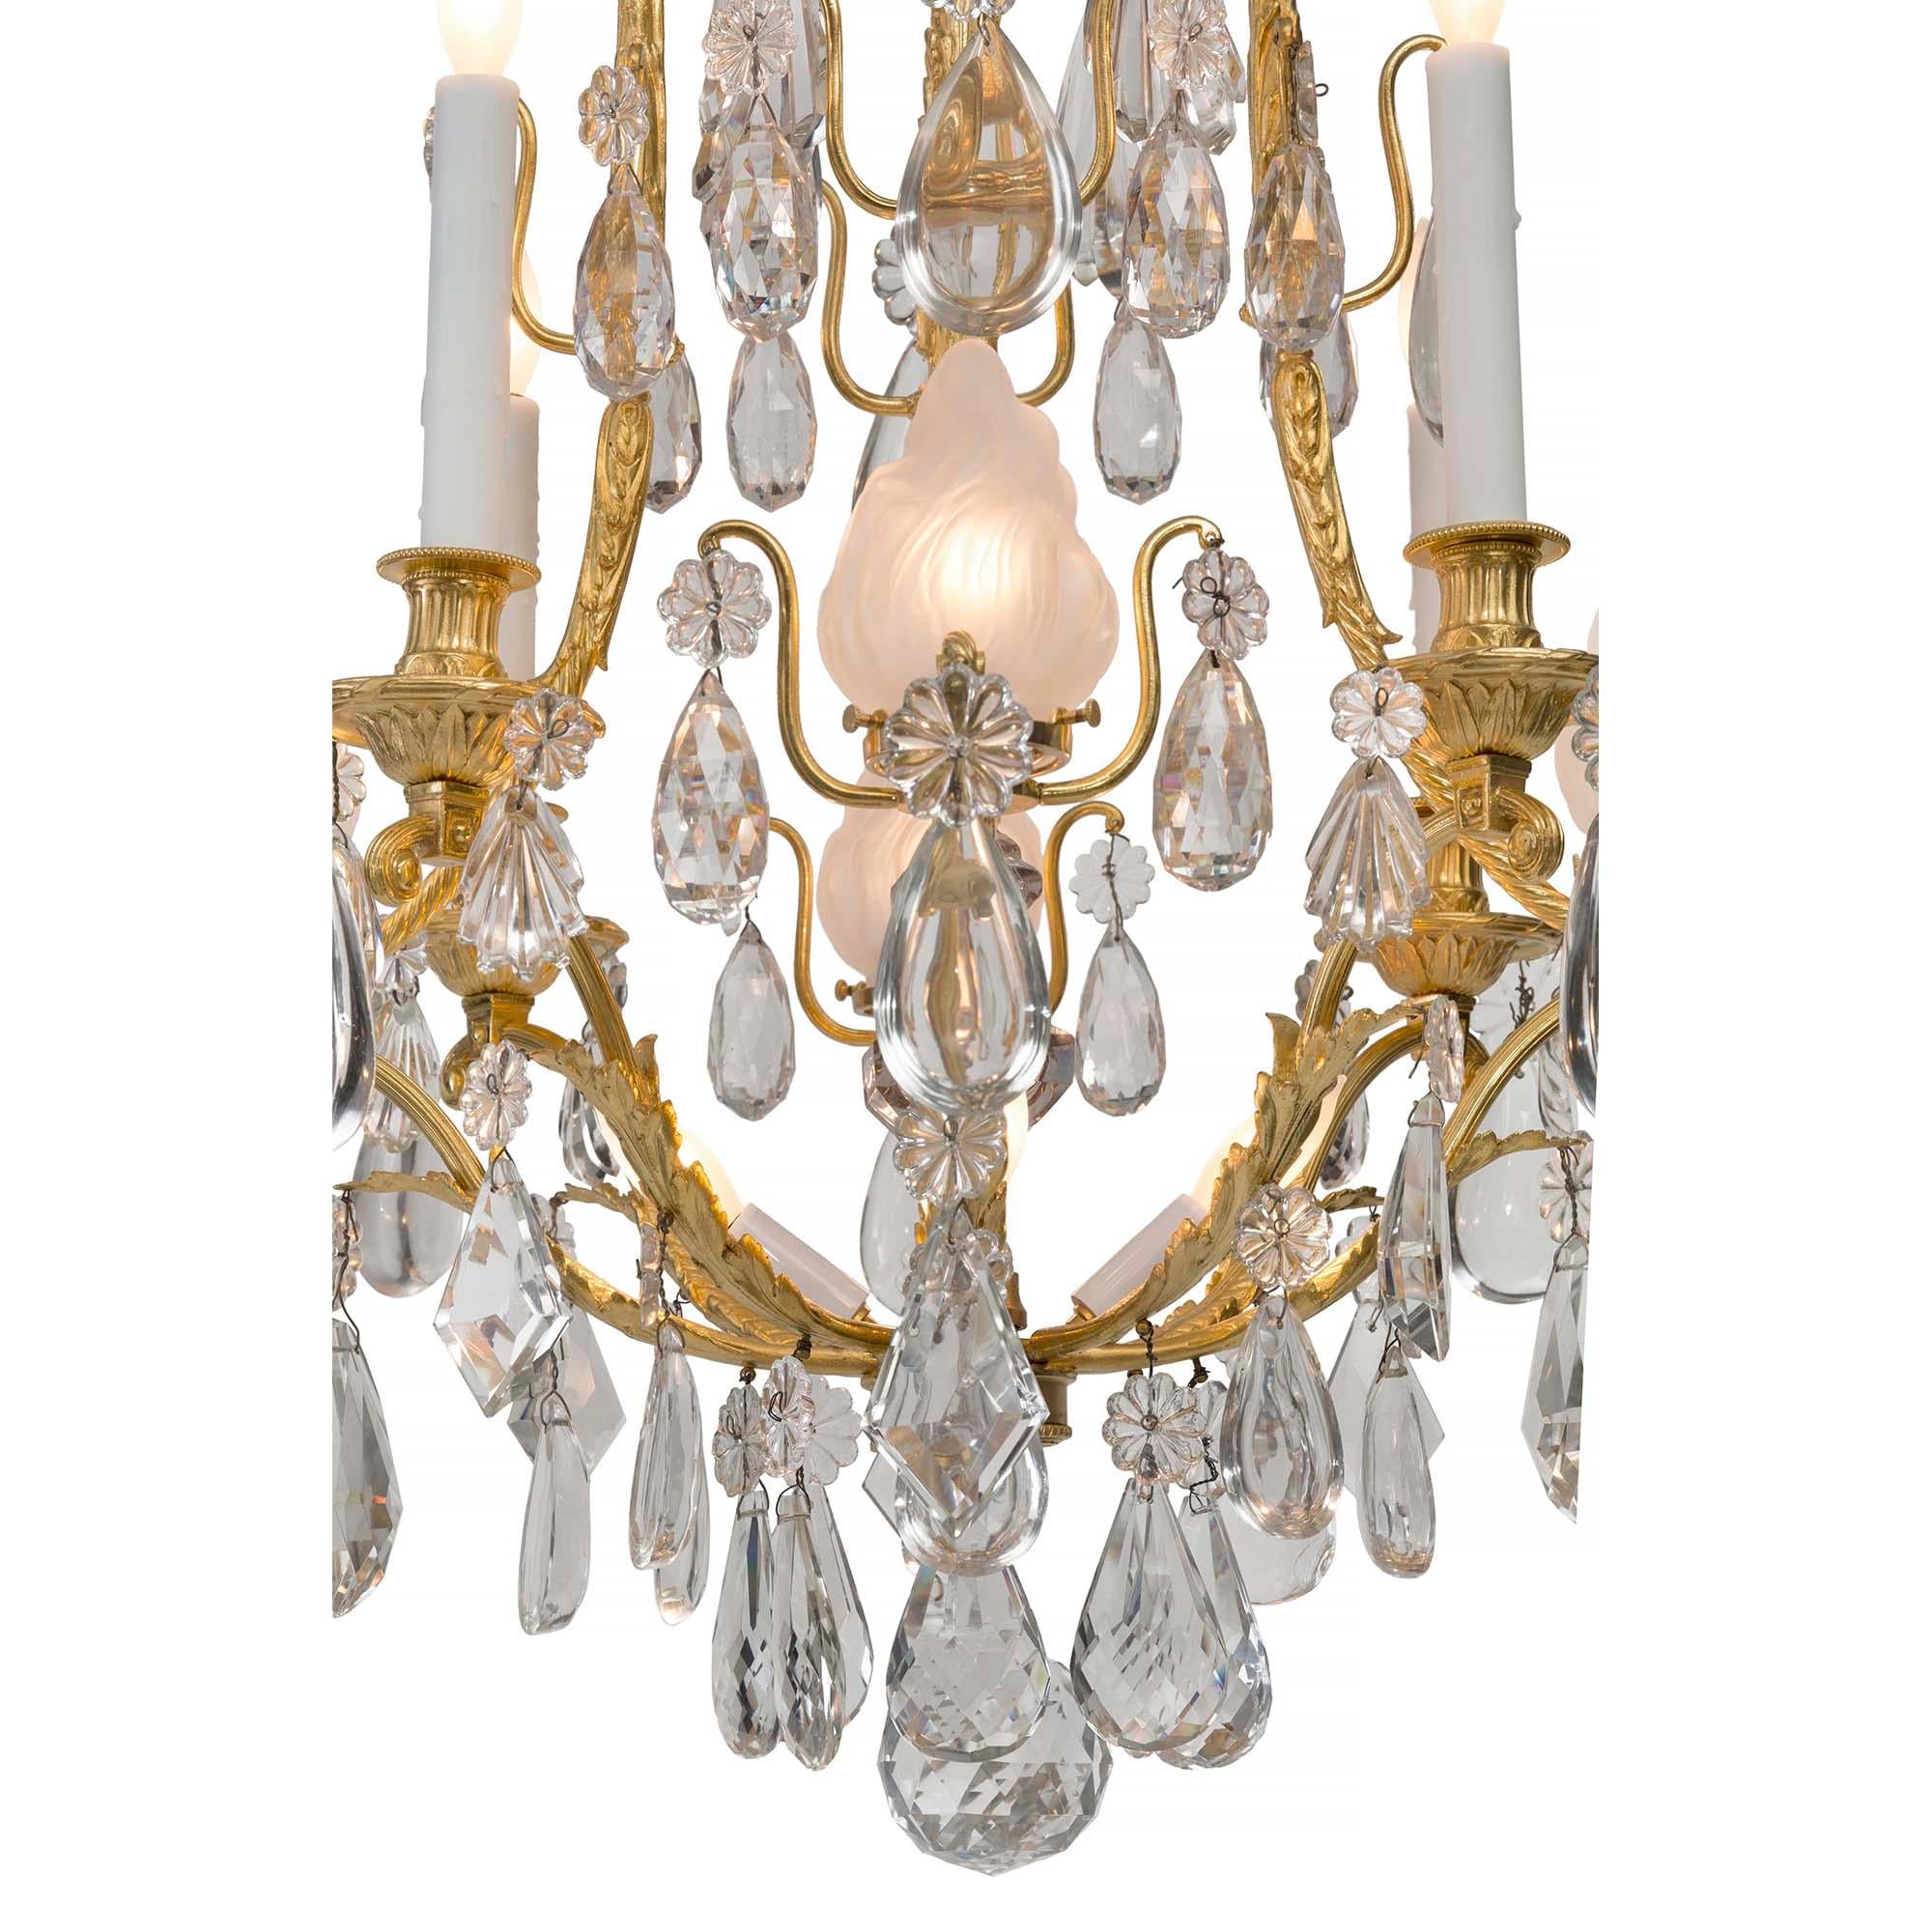 A stunning French 19th century Louis XVI st. Belle Epoque period ormolu and Baccarat crystal chandelier. The chandelier is centered by a beautiful cut crystal ball amidst striking smooth and cut tear drop and prism shaped crystals. Each arm is